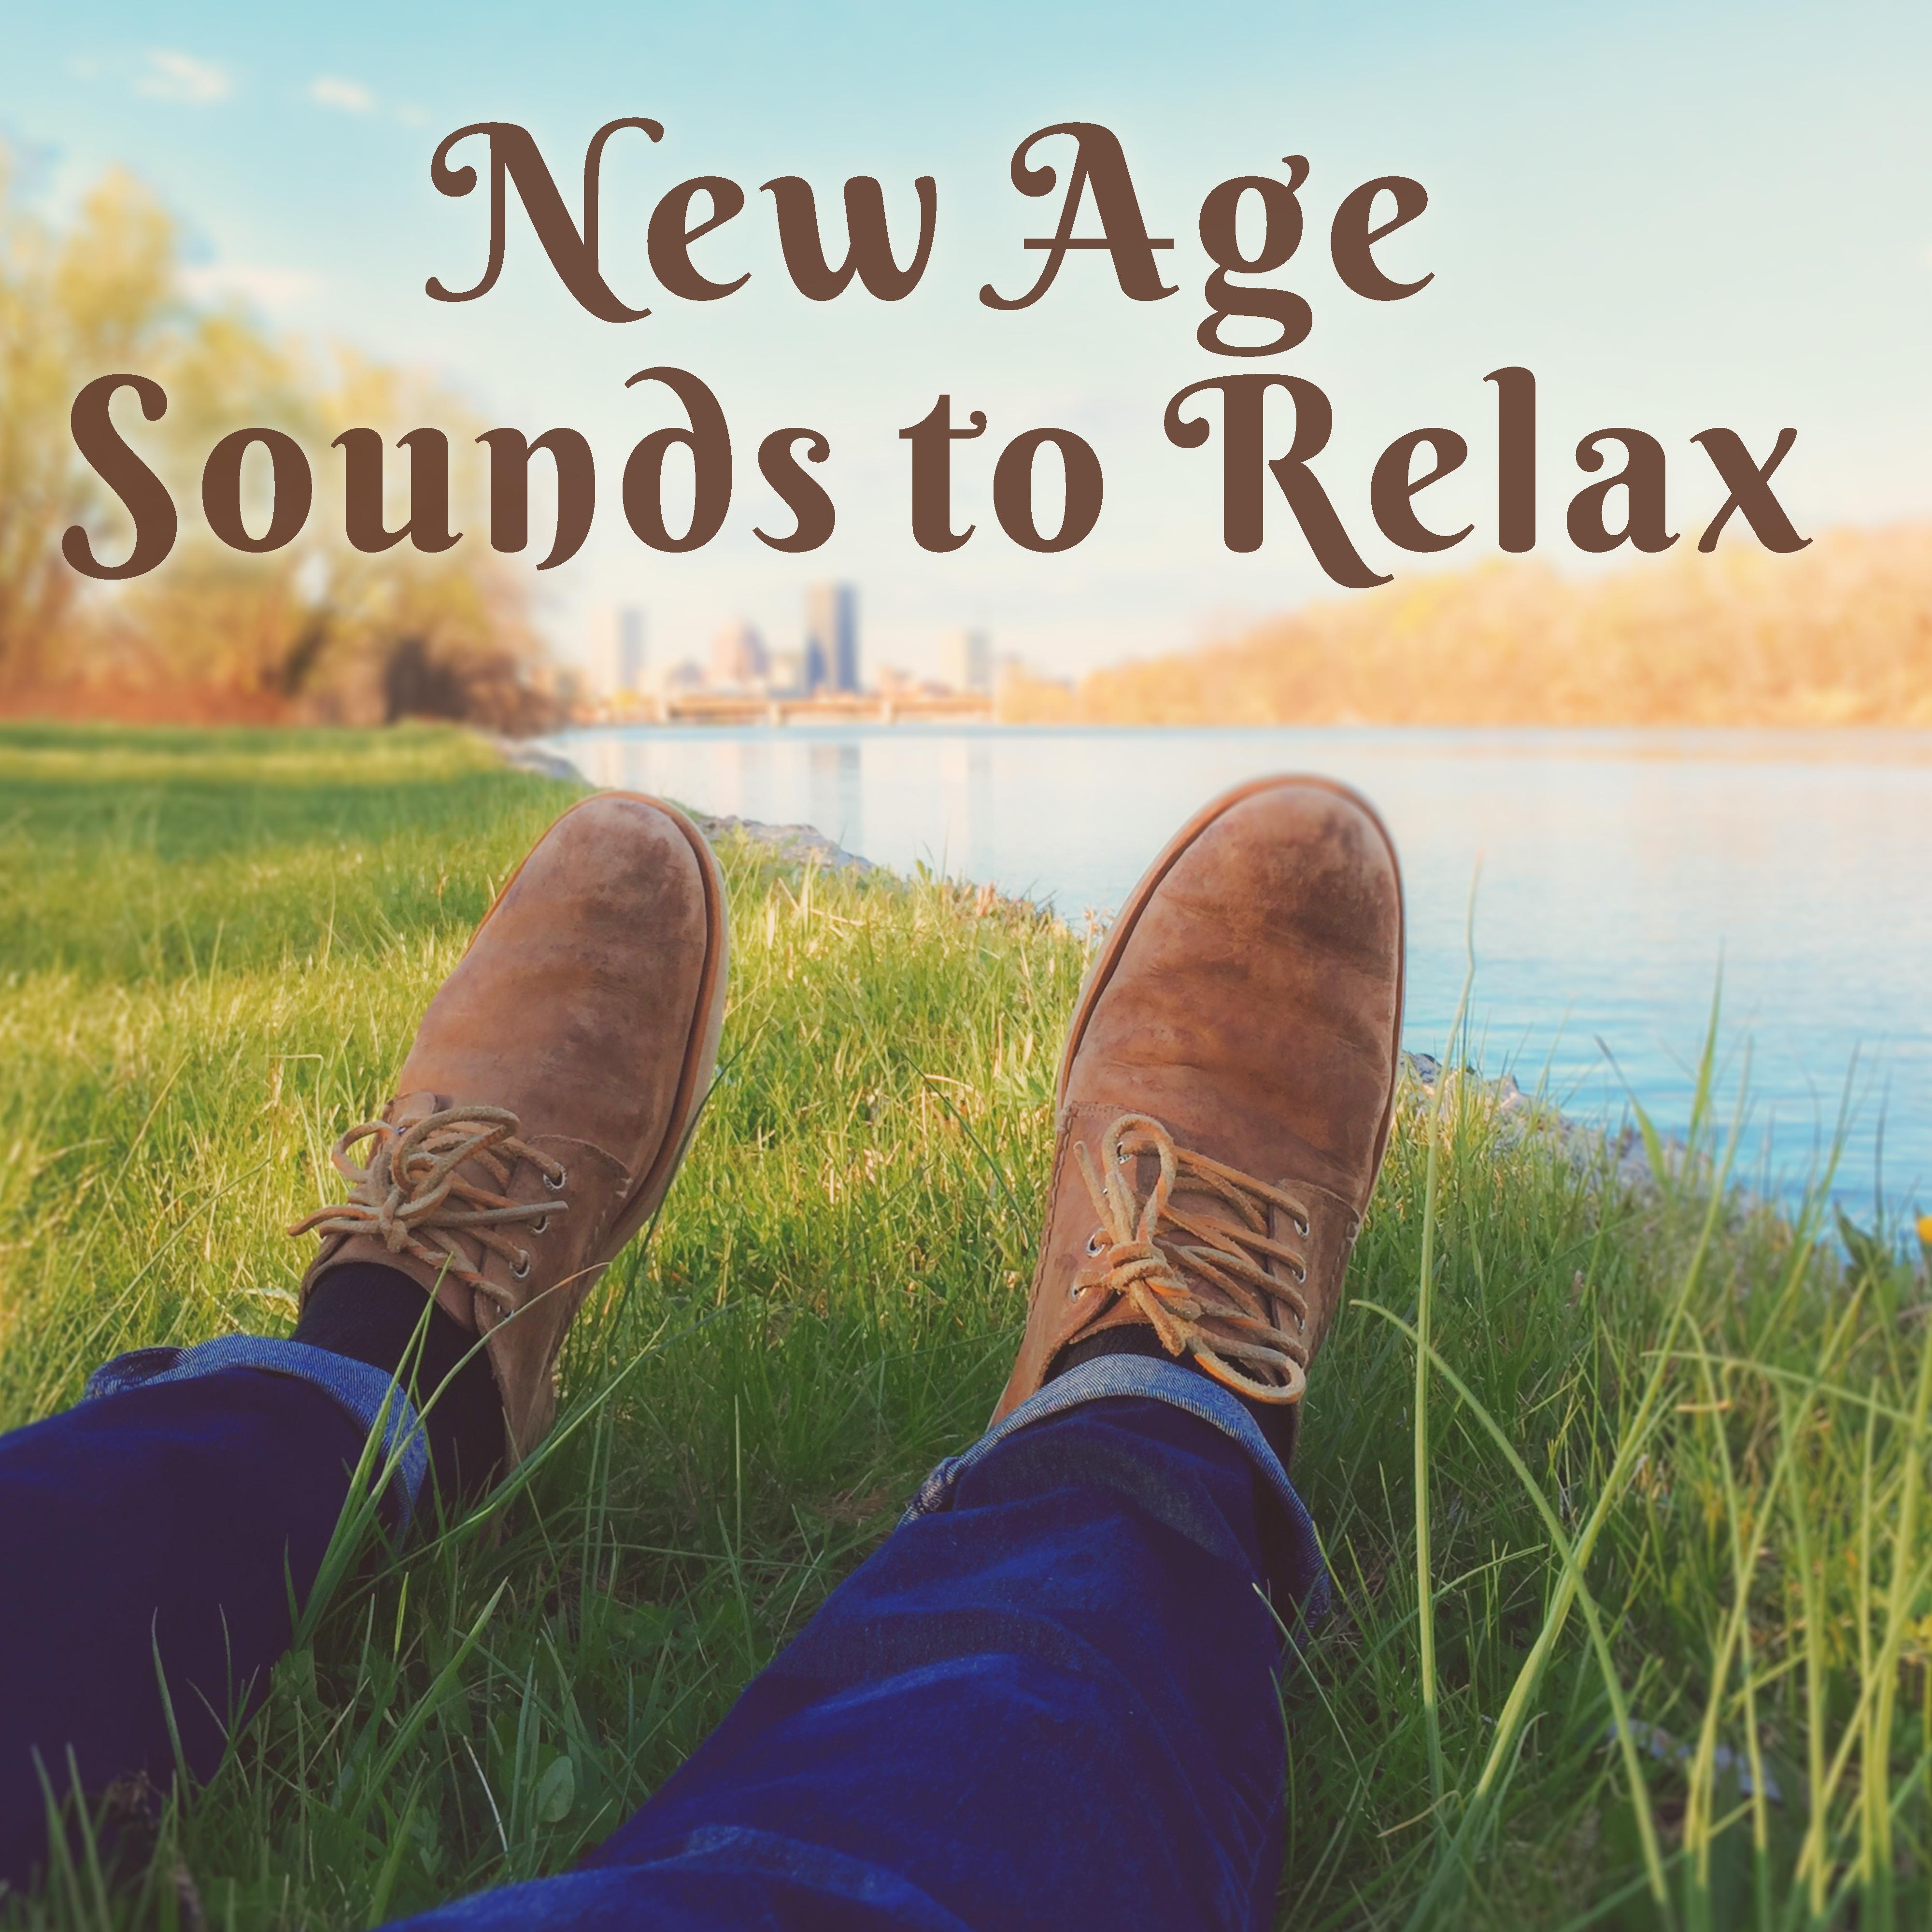 New Age Sounds to Relax  Calming Sounds for Mind Relaxation, New Age Songs, Nature Healing Melodies